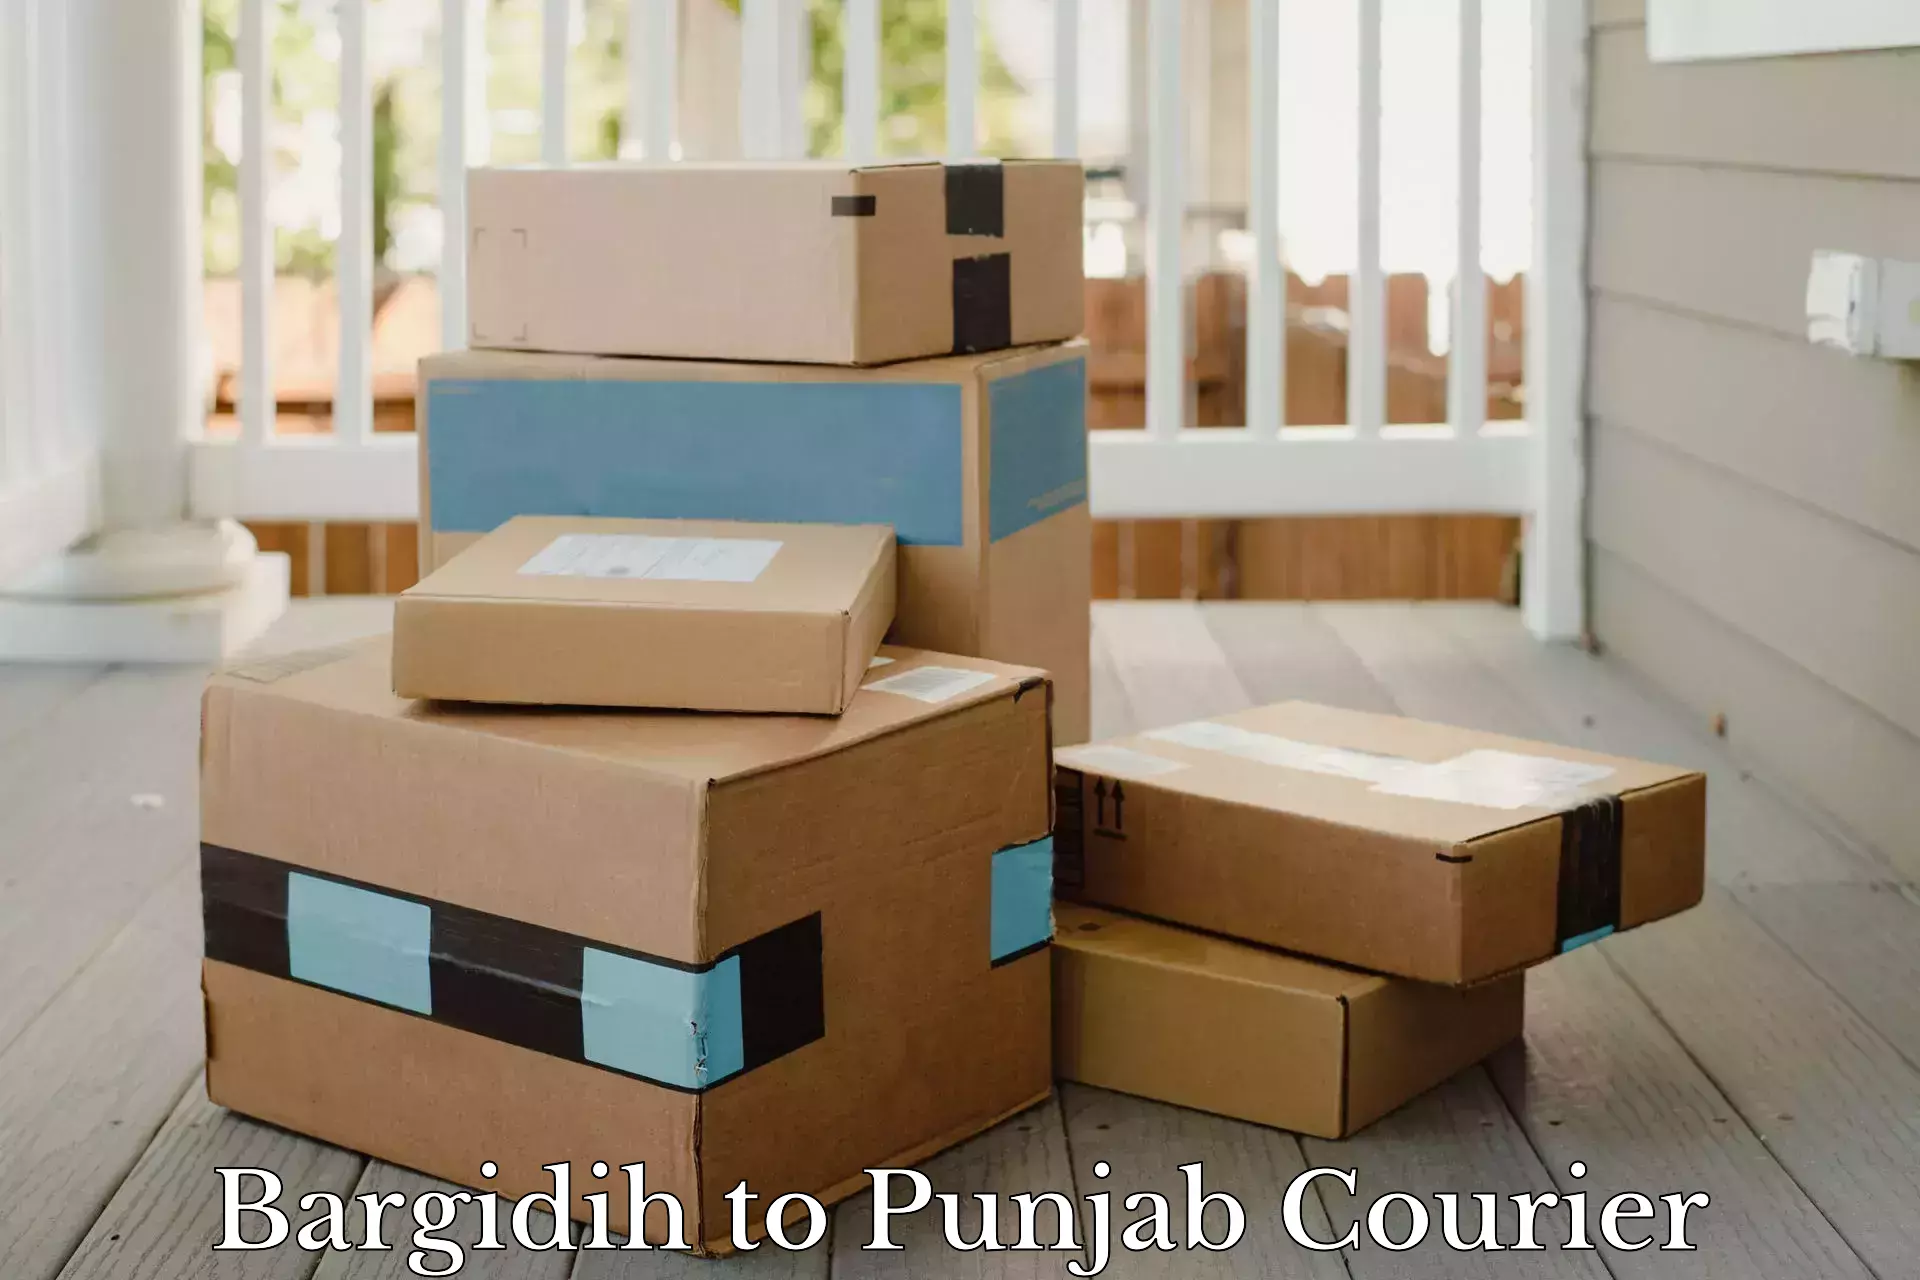 Nationwide courier service Bargidih to Pathankot